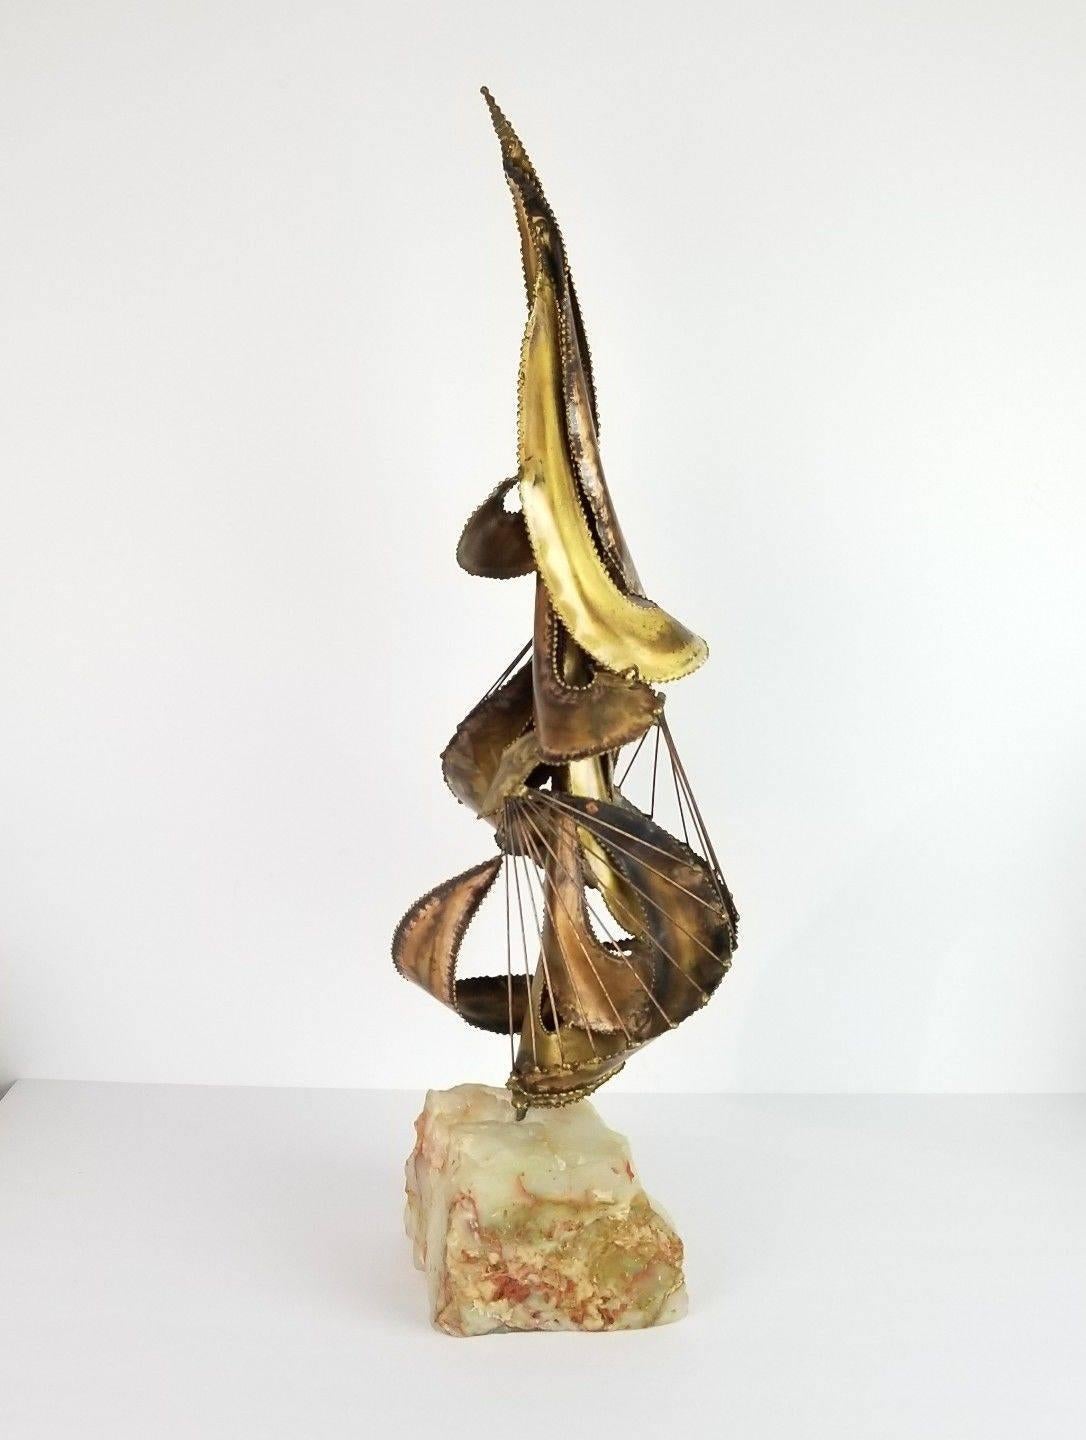 Mid-Century Modern Brutalist abstract sculpture. Sculpture is made of patinated brass with stone base. The twisting wire rods suggest a sailboat, and give the piece a nautical feel.